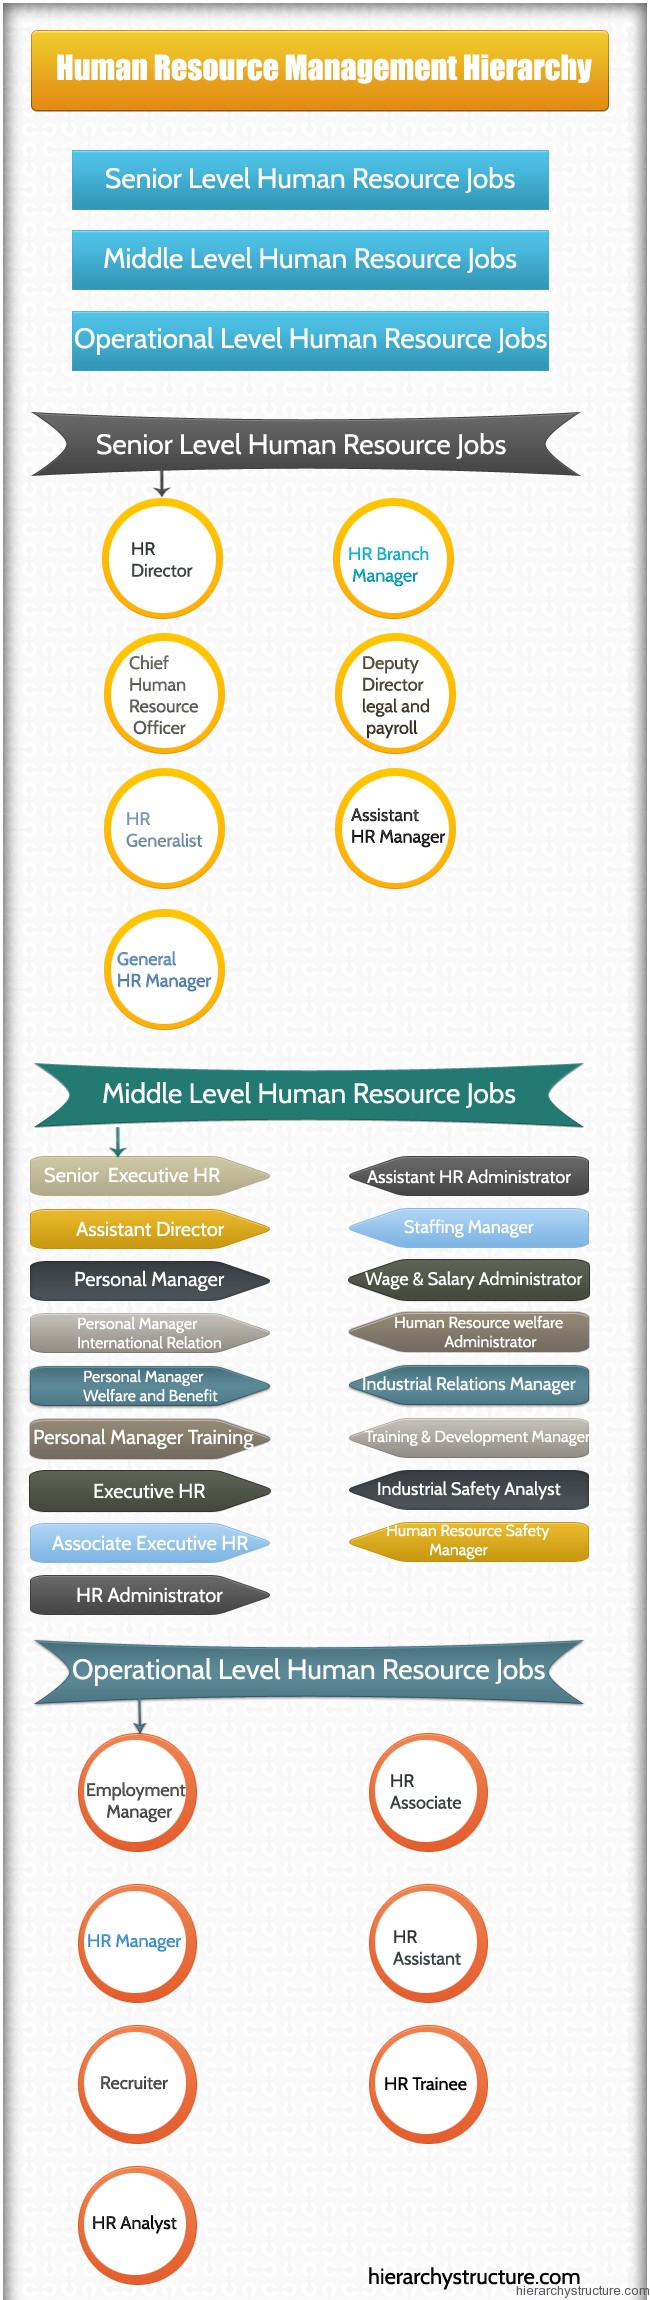 Human Resource Management Hierarchy